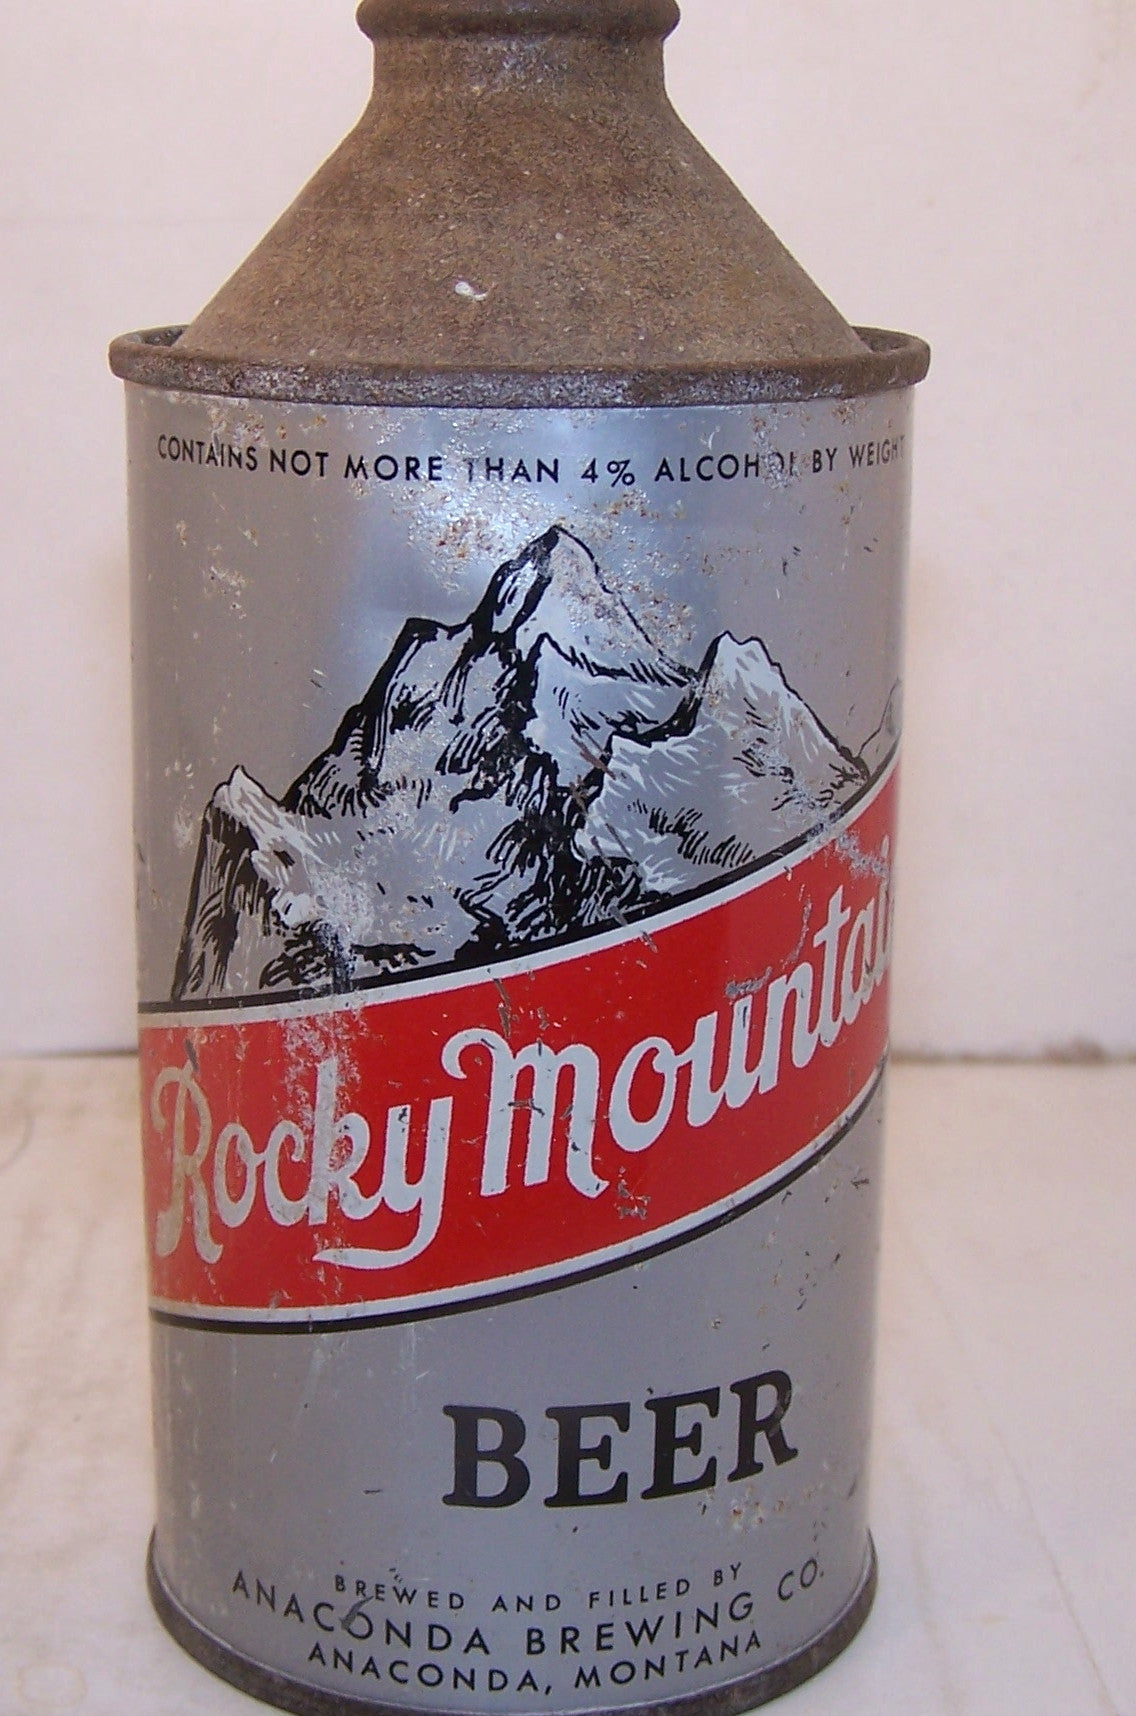 Rocky Mountain Beer, USBC 182-7, Grade 2 Sold on 3/17/15